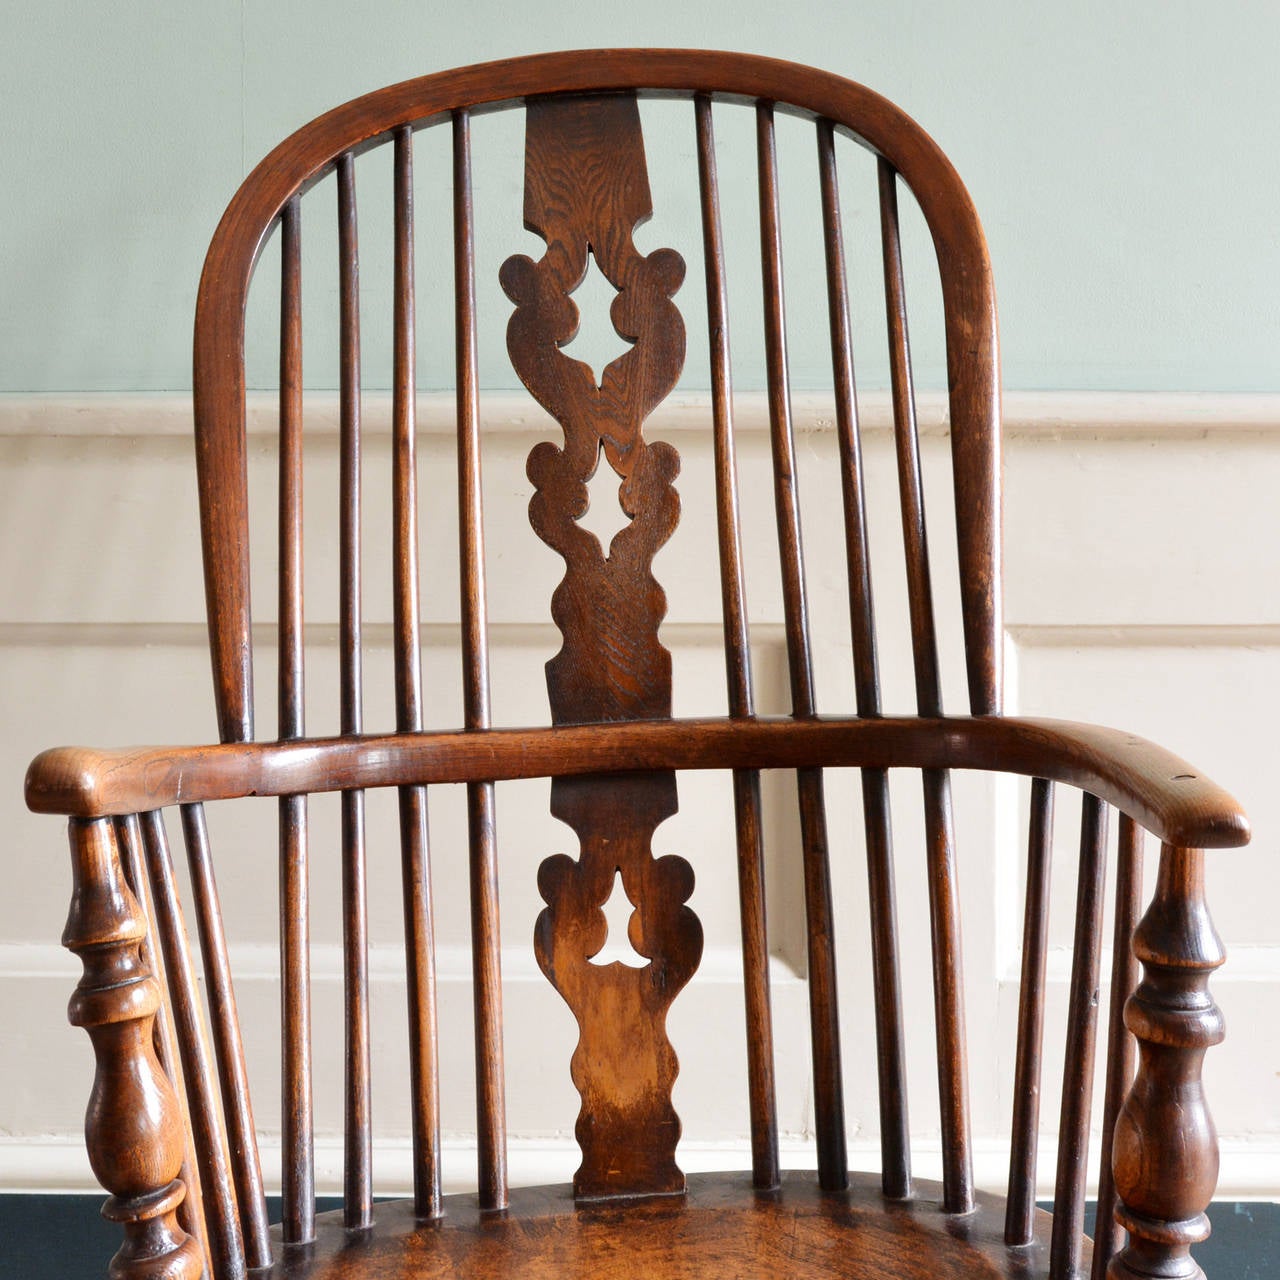 Country Splat-Back Windsor Chair